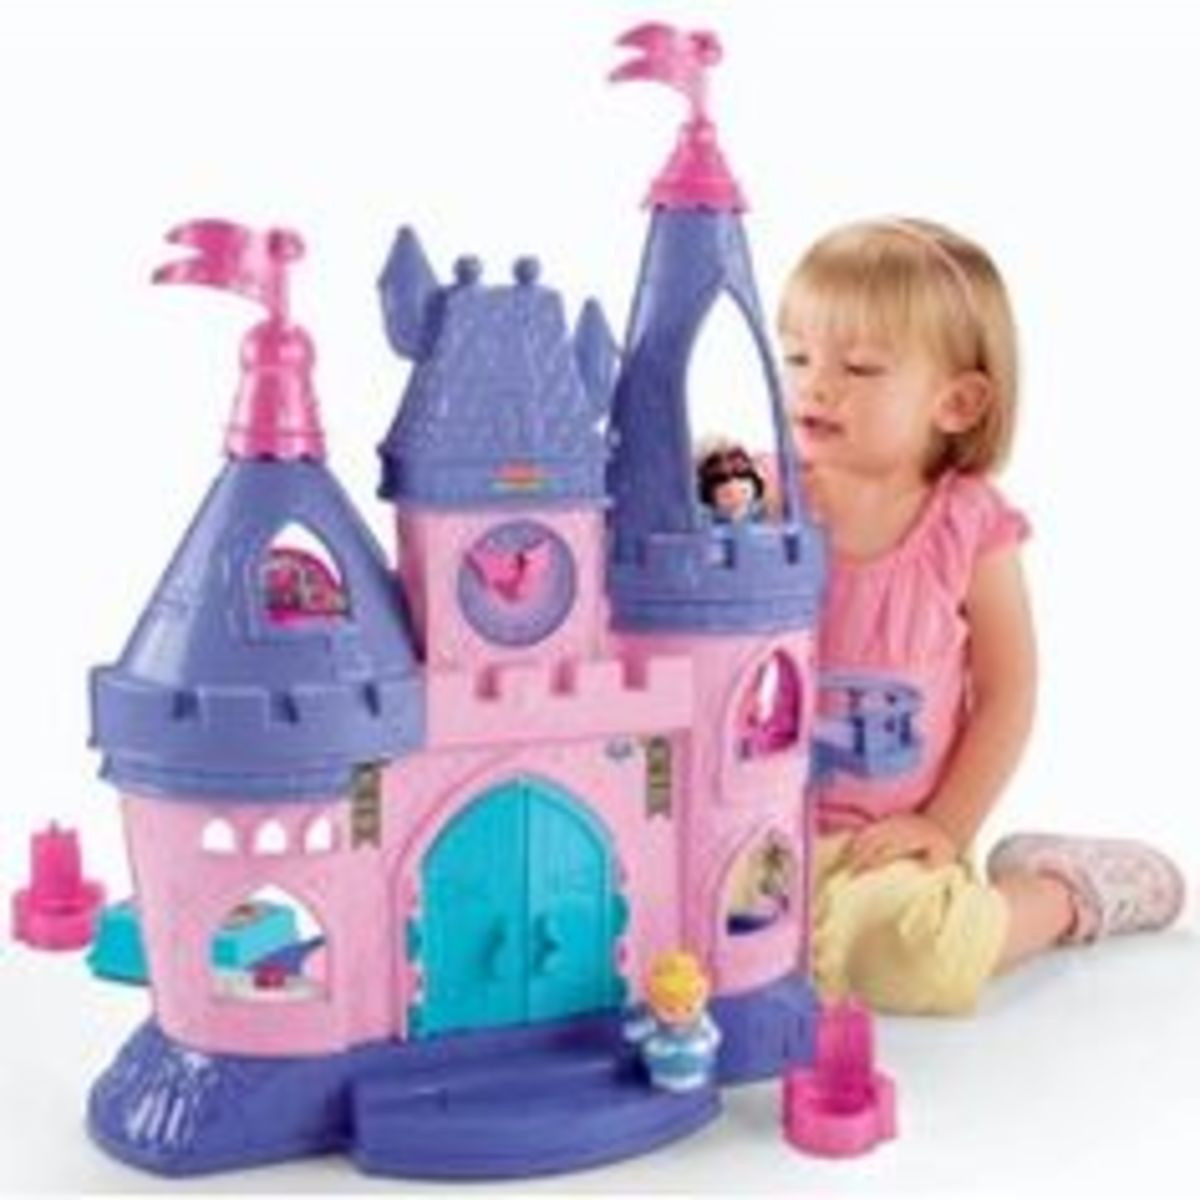 2 Year Old Baby Girl Gift Ideas
 Best Christmas Gift Ideas For A 2 Year Old Baby Girl